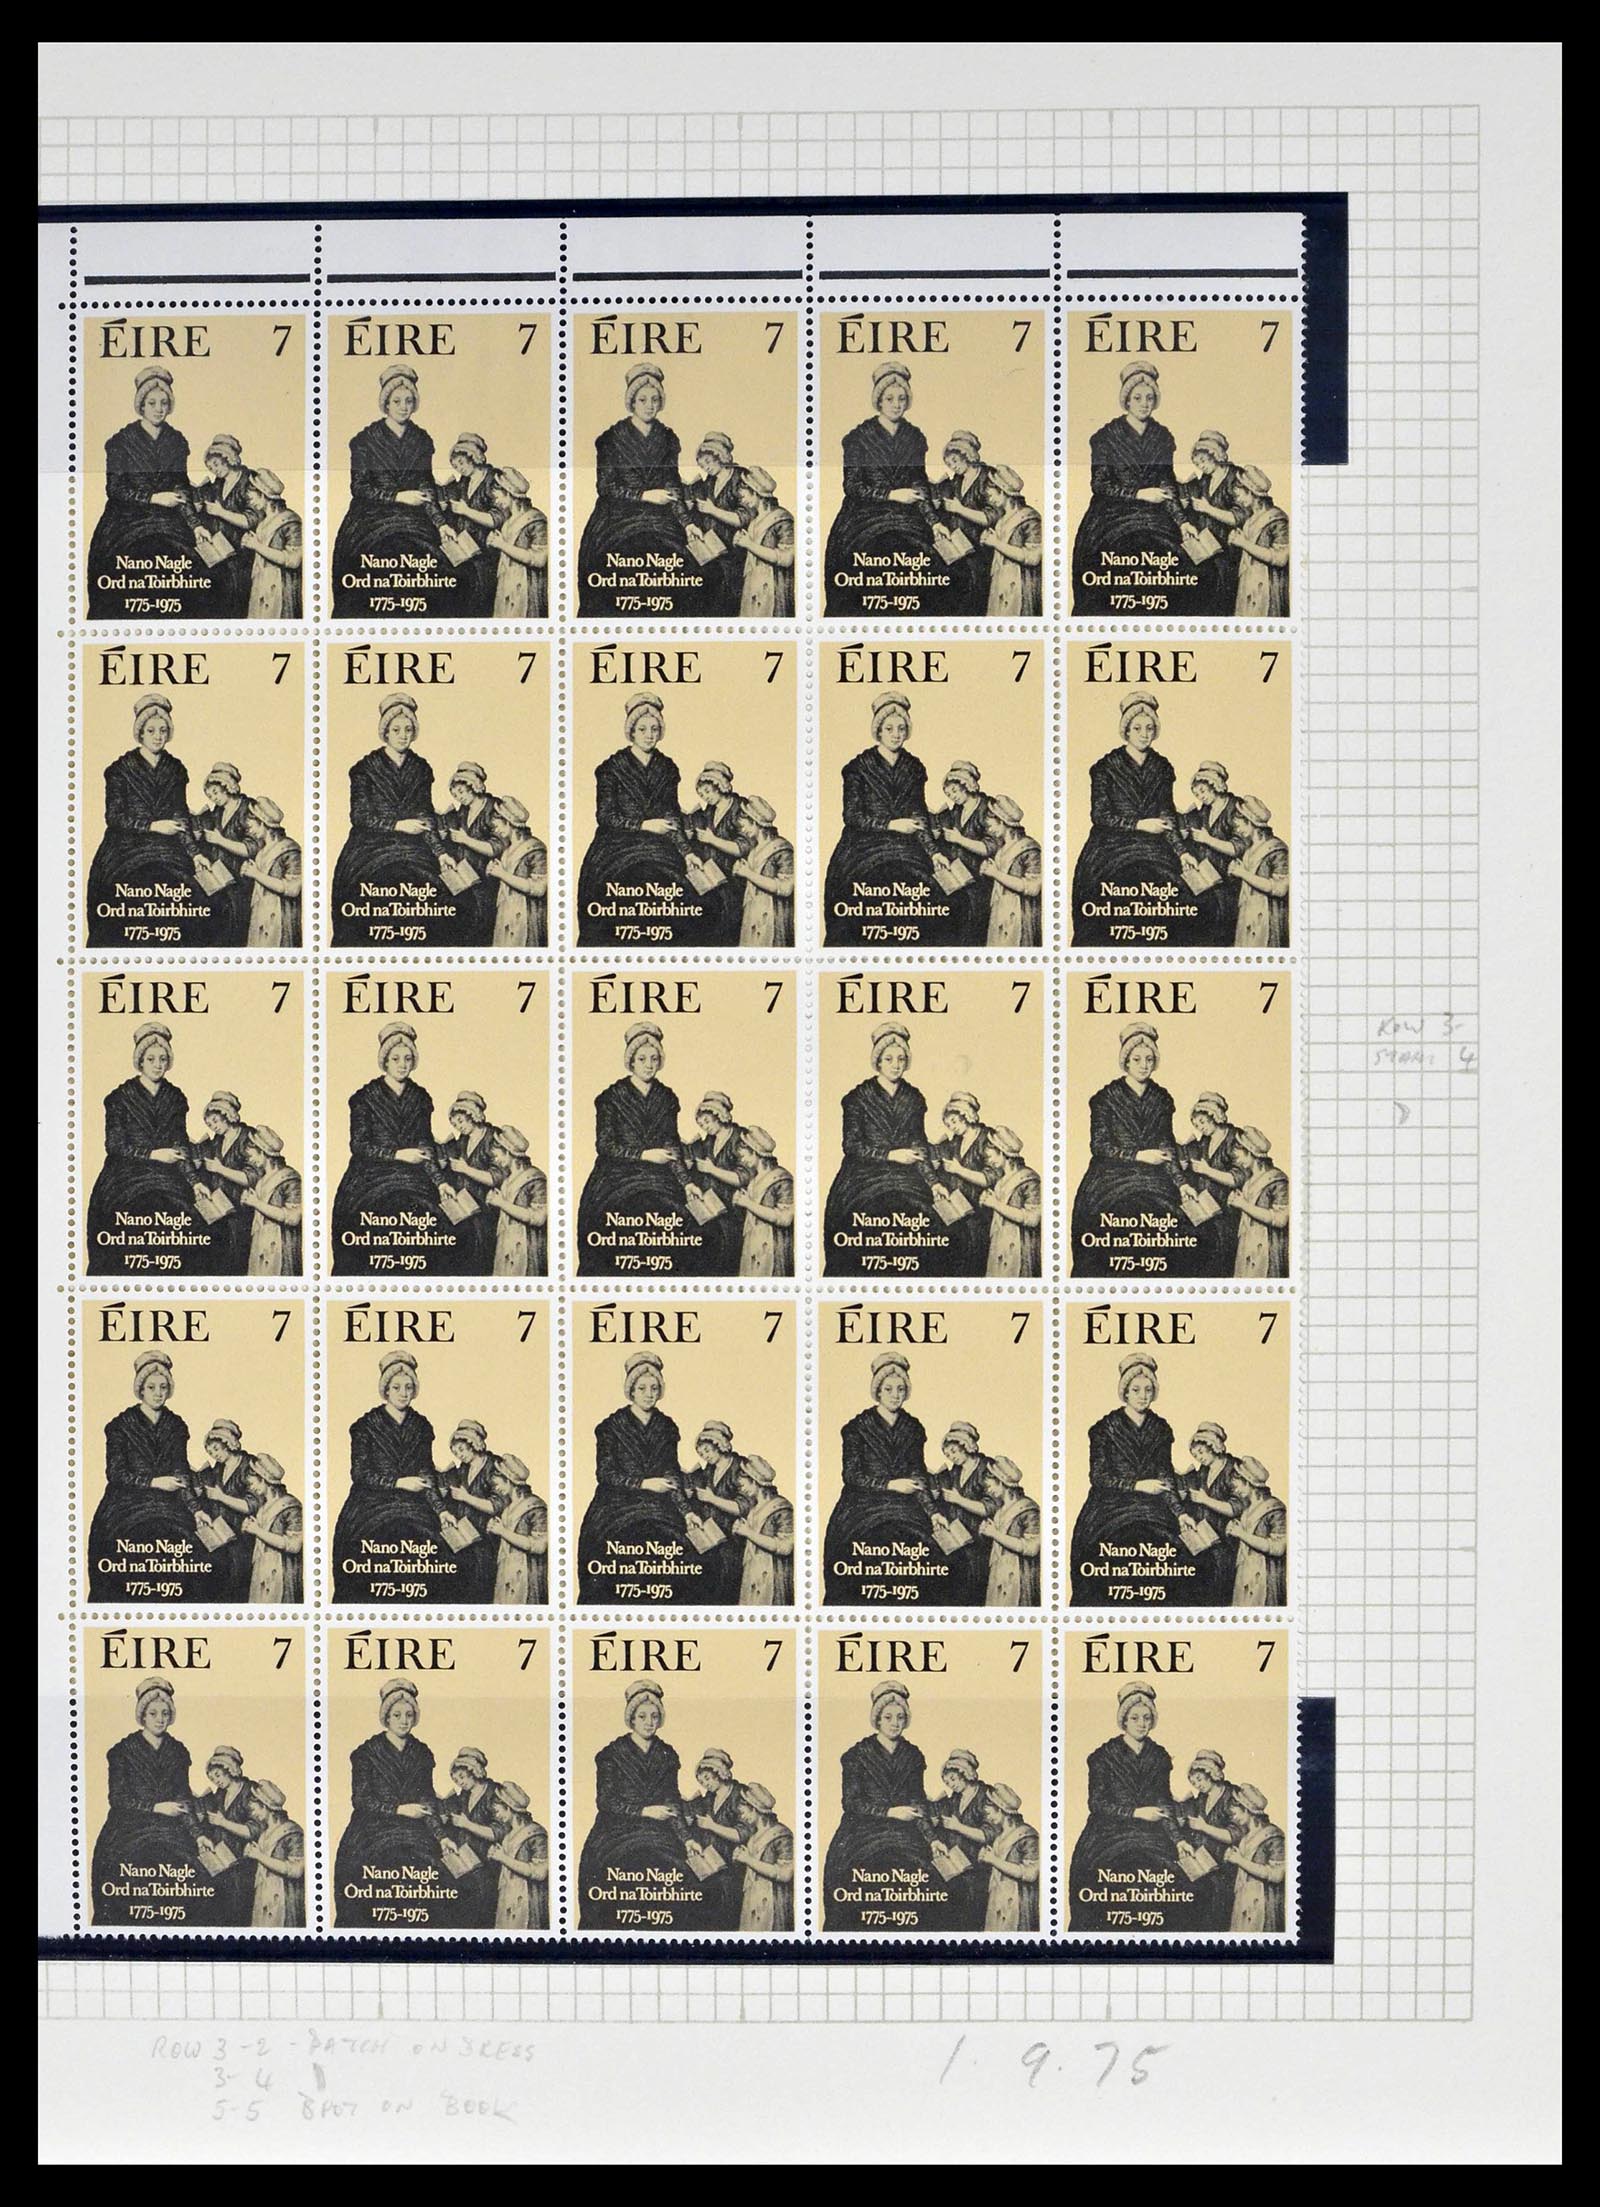 39272 0051 - Stamp collection 39272 Ireland plateflaws and varities 1963-1981.